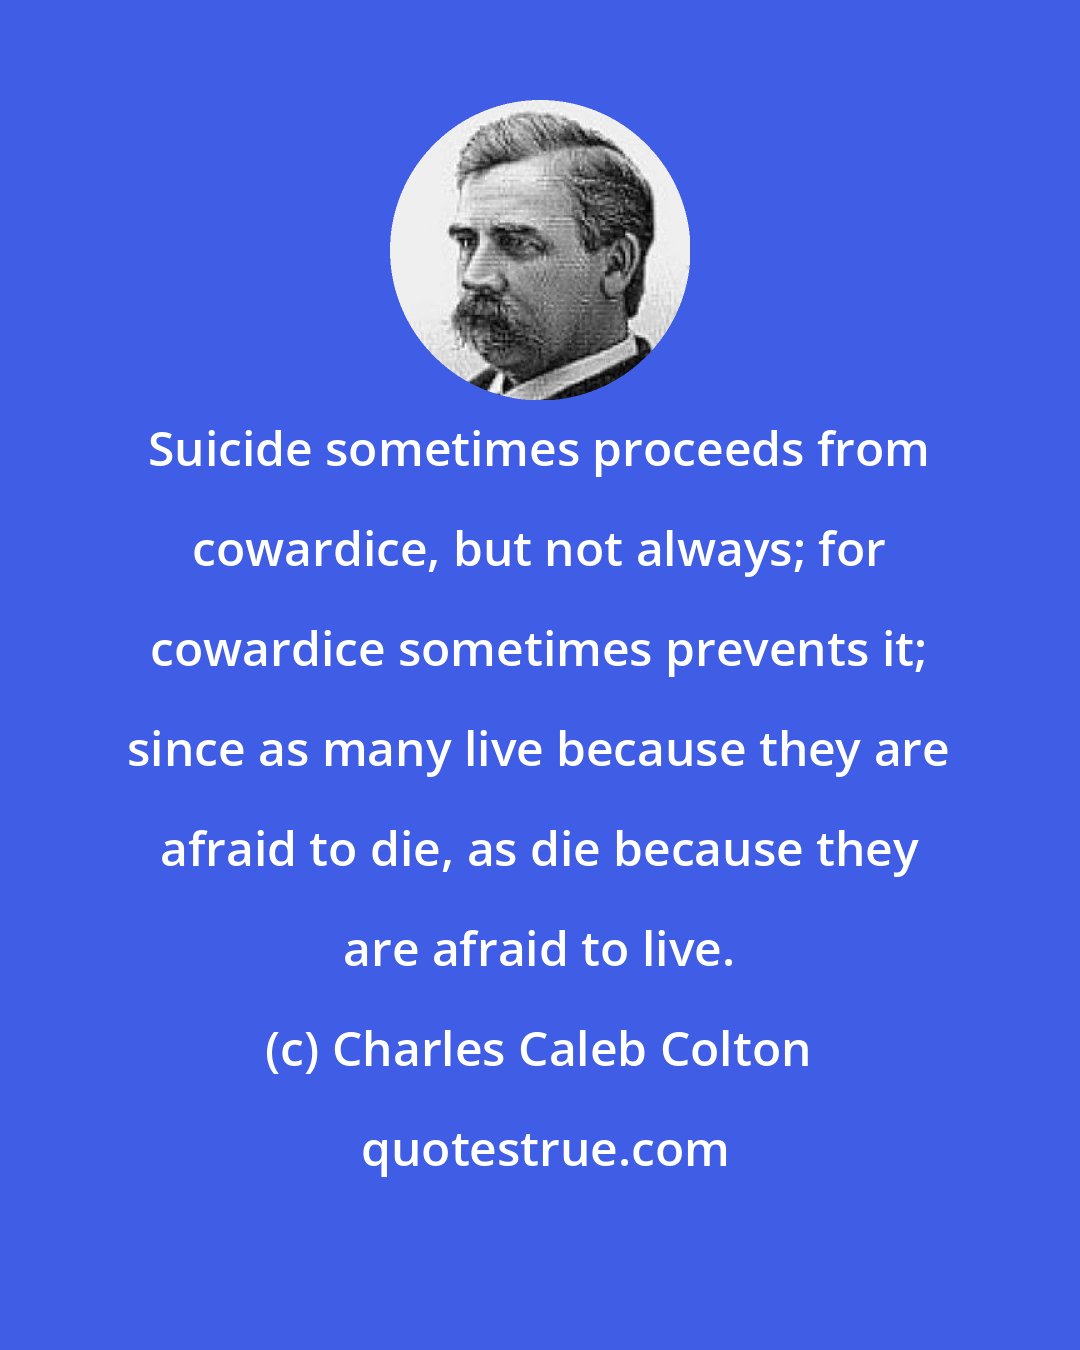 Charles Caleb Colton: Suicide sometimes proceeds from cowardice, but not always; for cowardice sometimes prevents it; since as many live because they are afraid to die, as die because they are afraid to live.